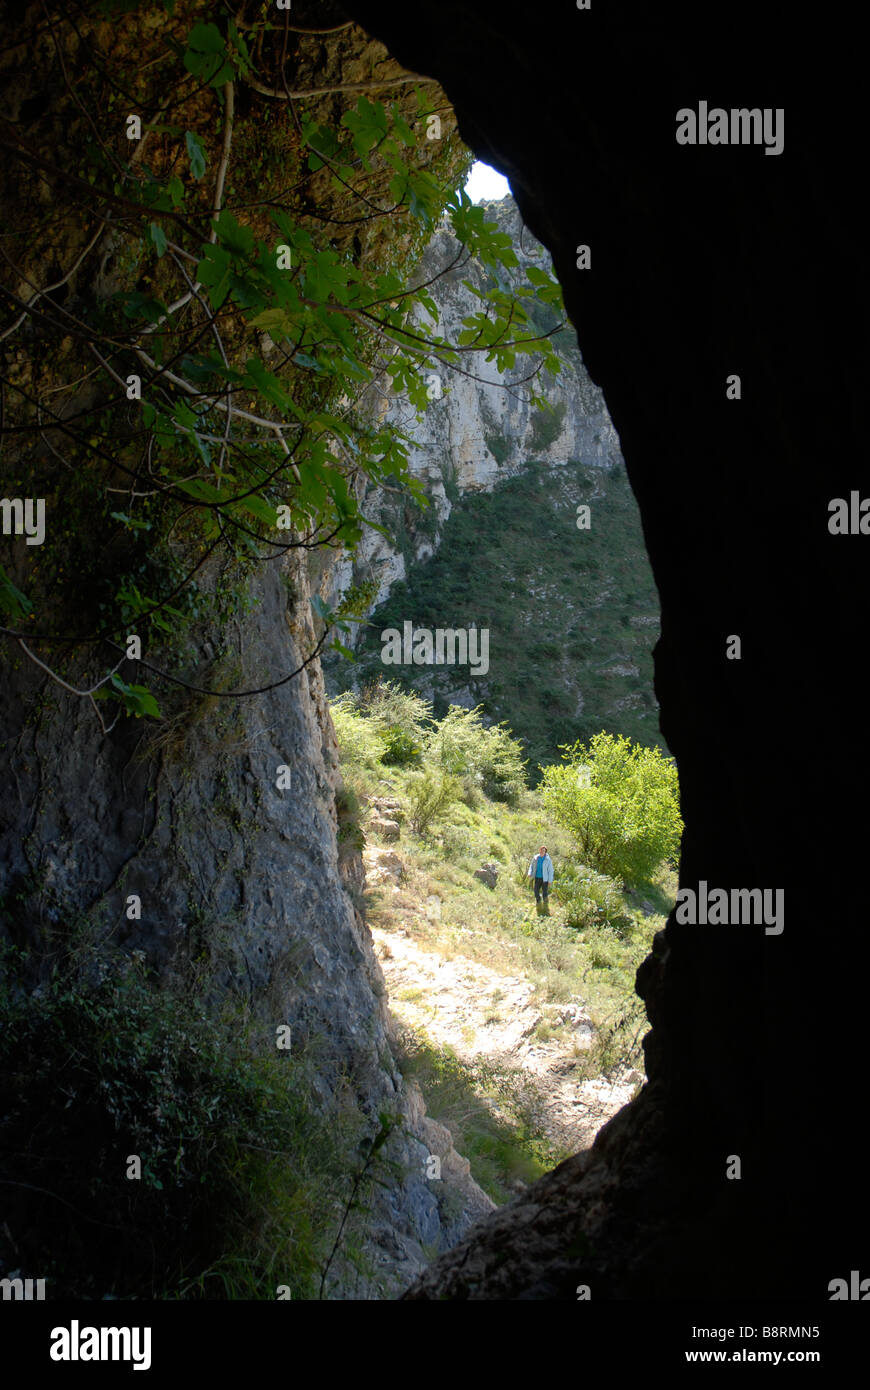 looking out of a cave, Vall de Laguart, Benimaurell, Alicante Province, Comunidad Valenciana, Spain Stock Photo